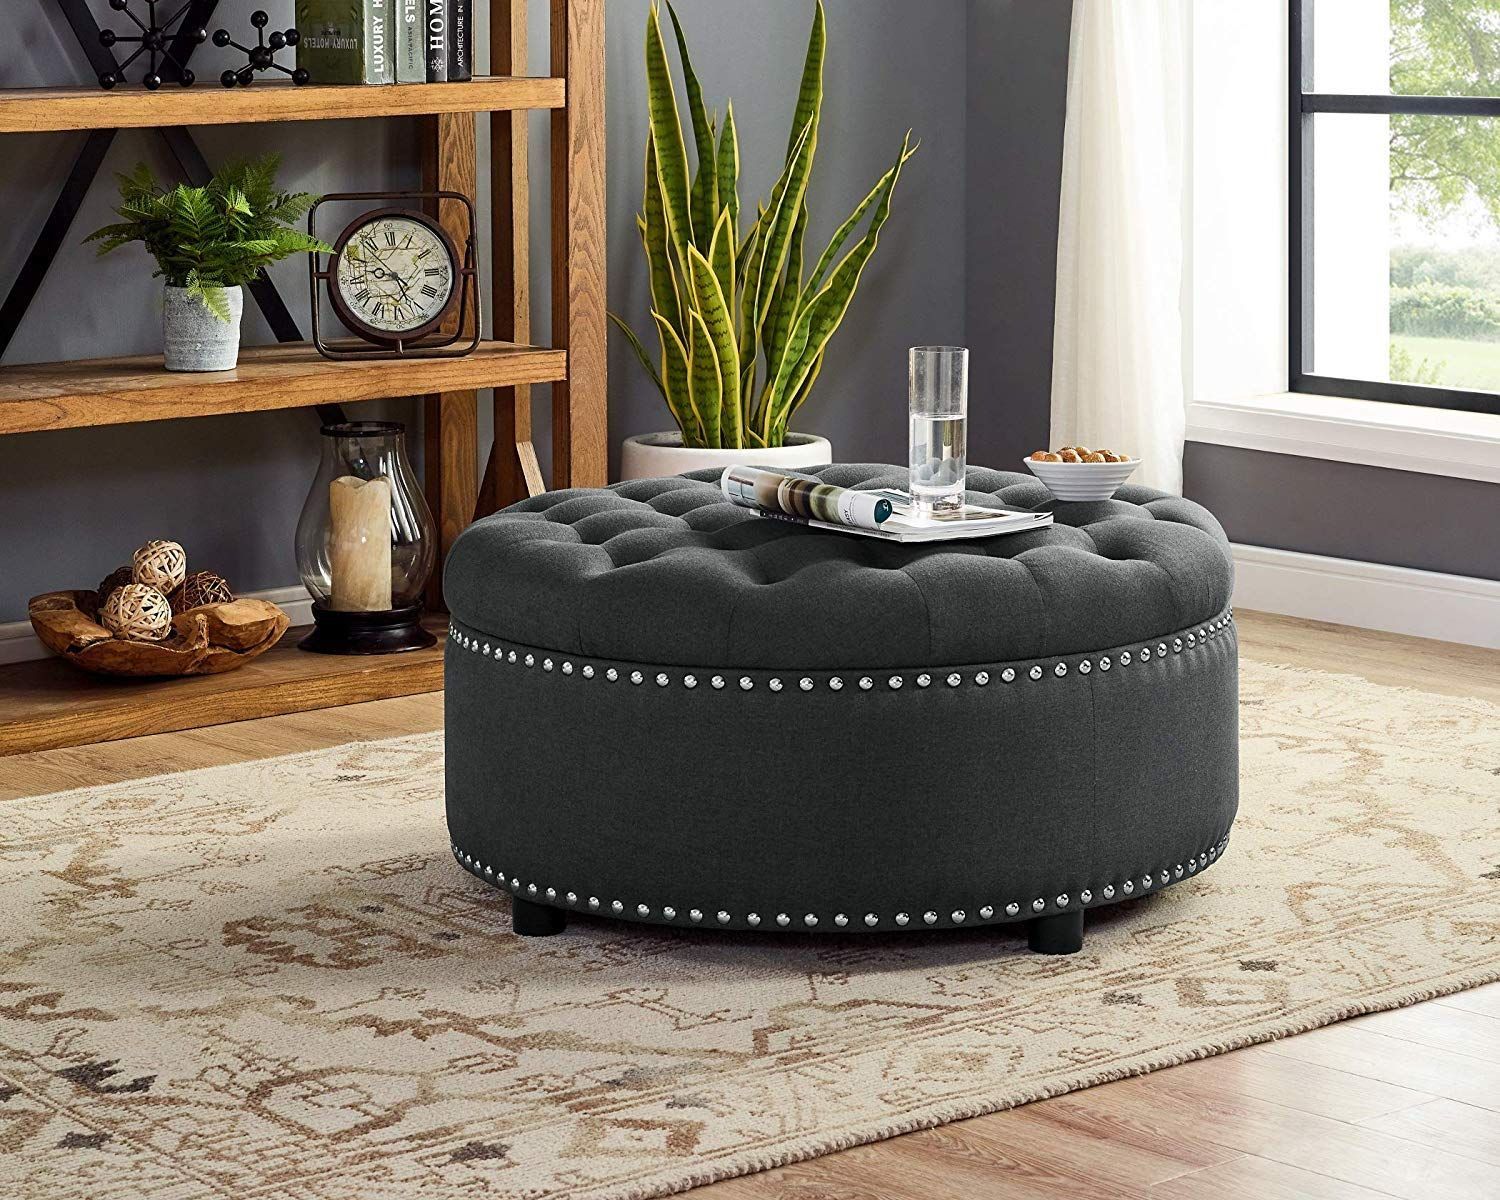 Dazone Round Storage Ottoman, Fabric Upholstered Nailhead Studded Intended For Fabric Storage Ottomans (View 14 of 20)